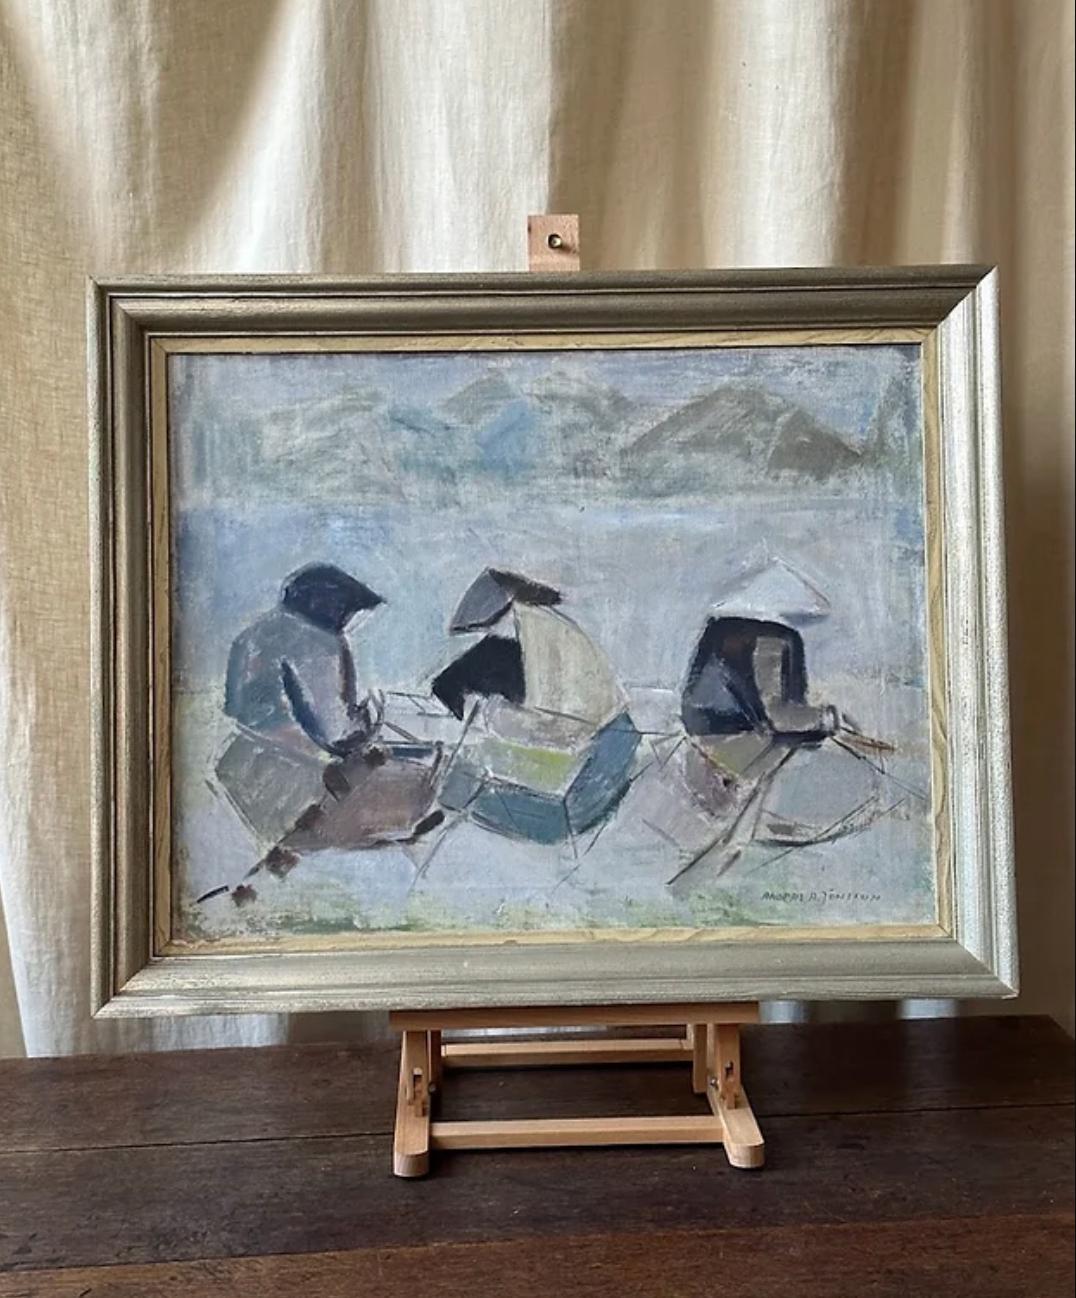 Framed Oil Landscape Of Working Women By Anders Jönsson, Signed.

Anders Jönsson was a Swedish Impressionist and modern sculptor who was born in 1907. (Born: 9 July 1907 Died: 2002)

Measurements:
Framed: 77cm x 63 cm x 4.5cm